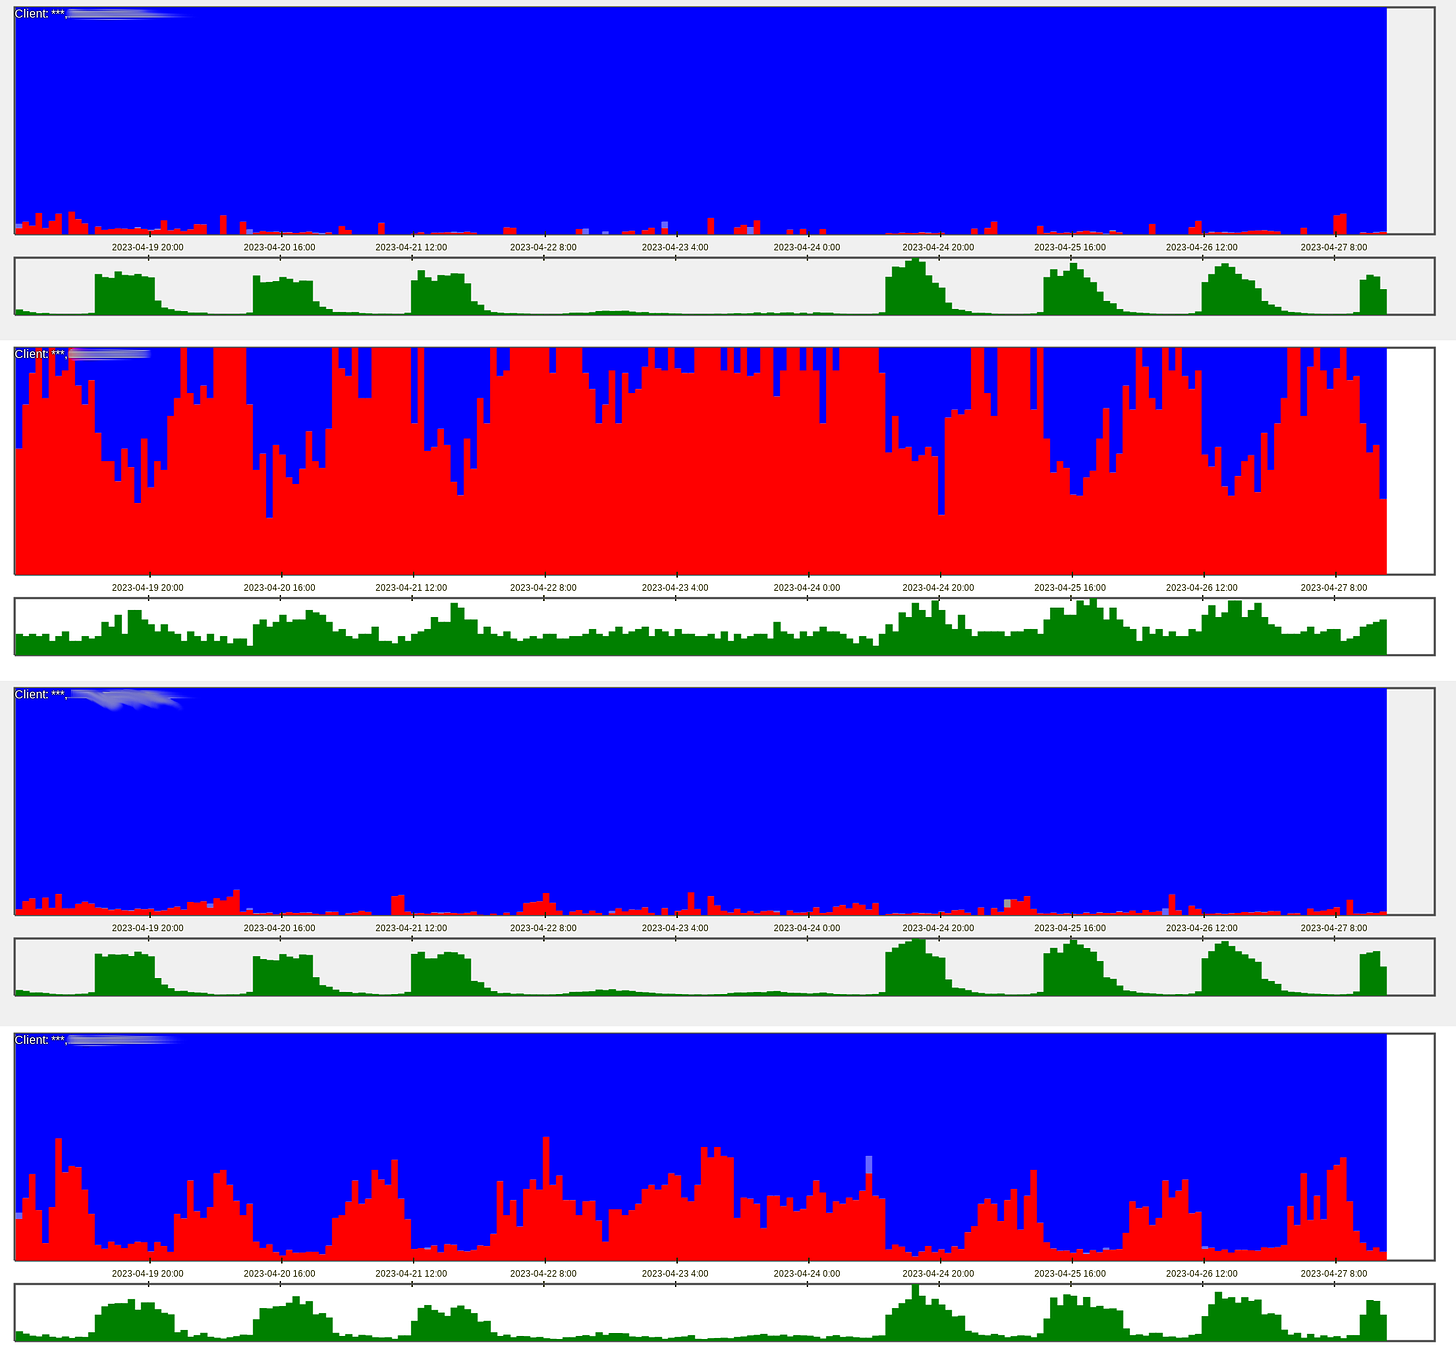 Figure 7. All traffic broken down by types of user interaction. Each subchart shows visitors as human (blue) and fraud (red) and volume in green.